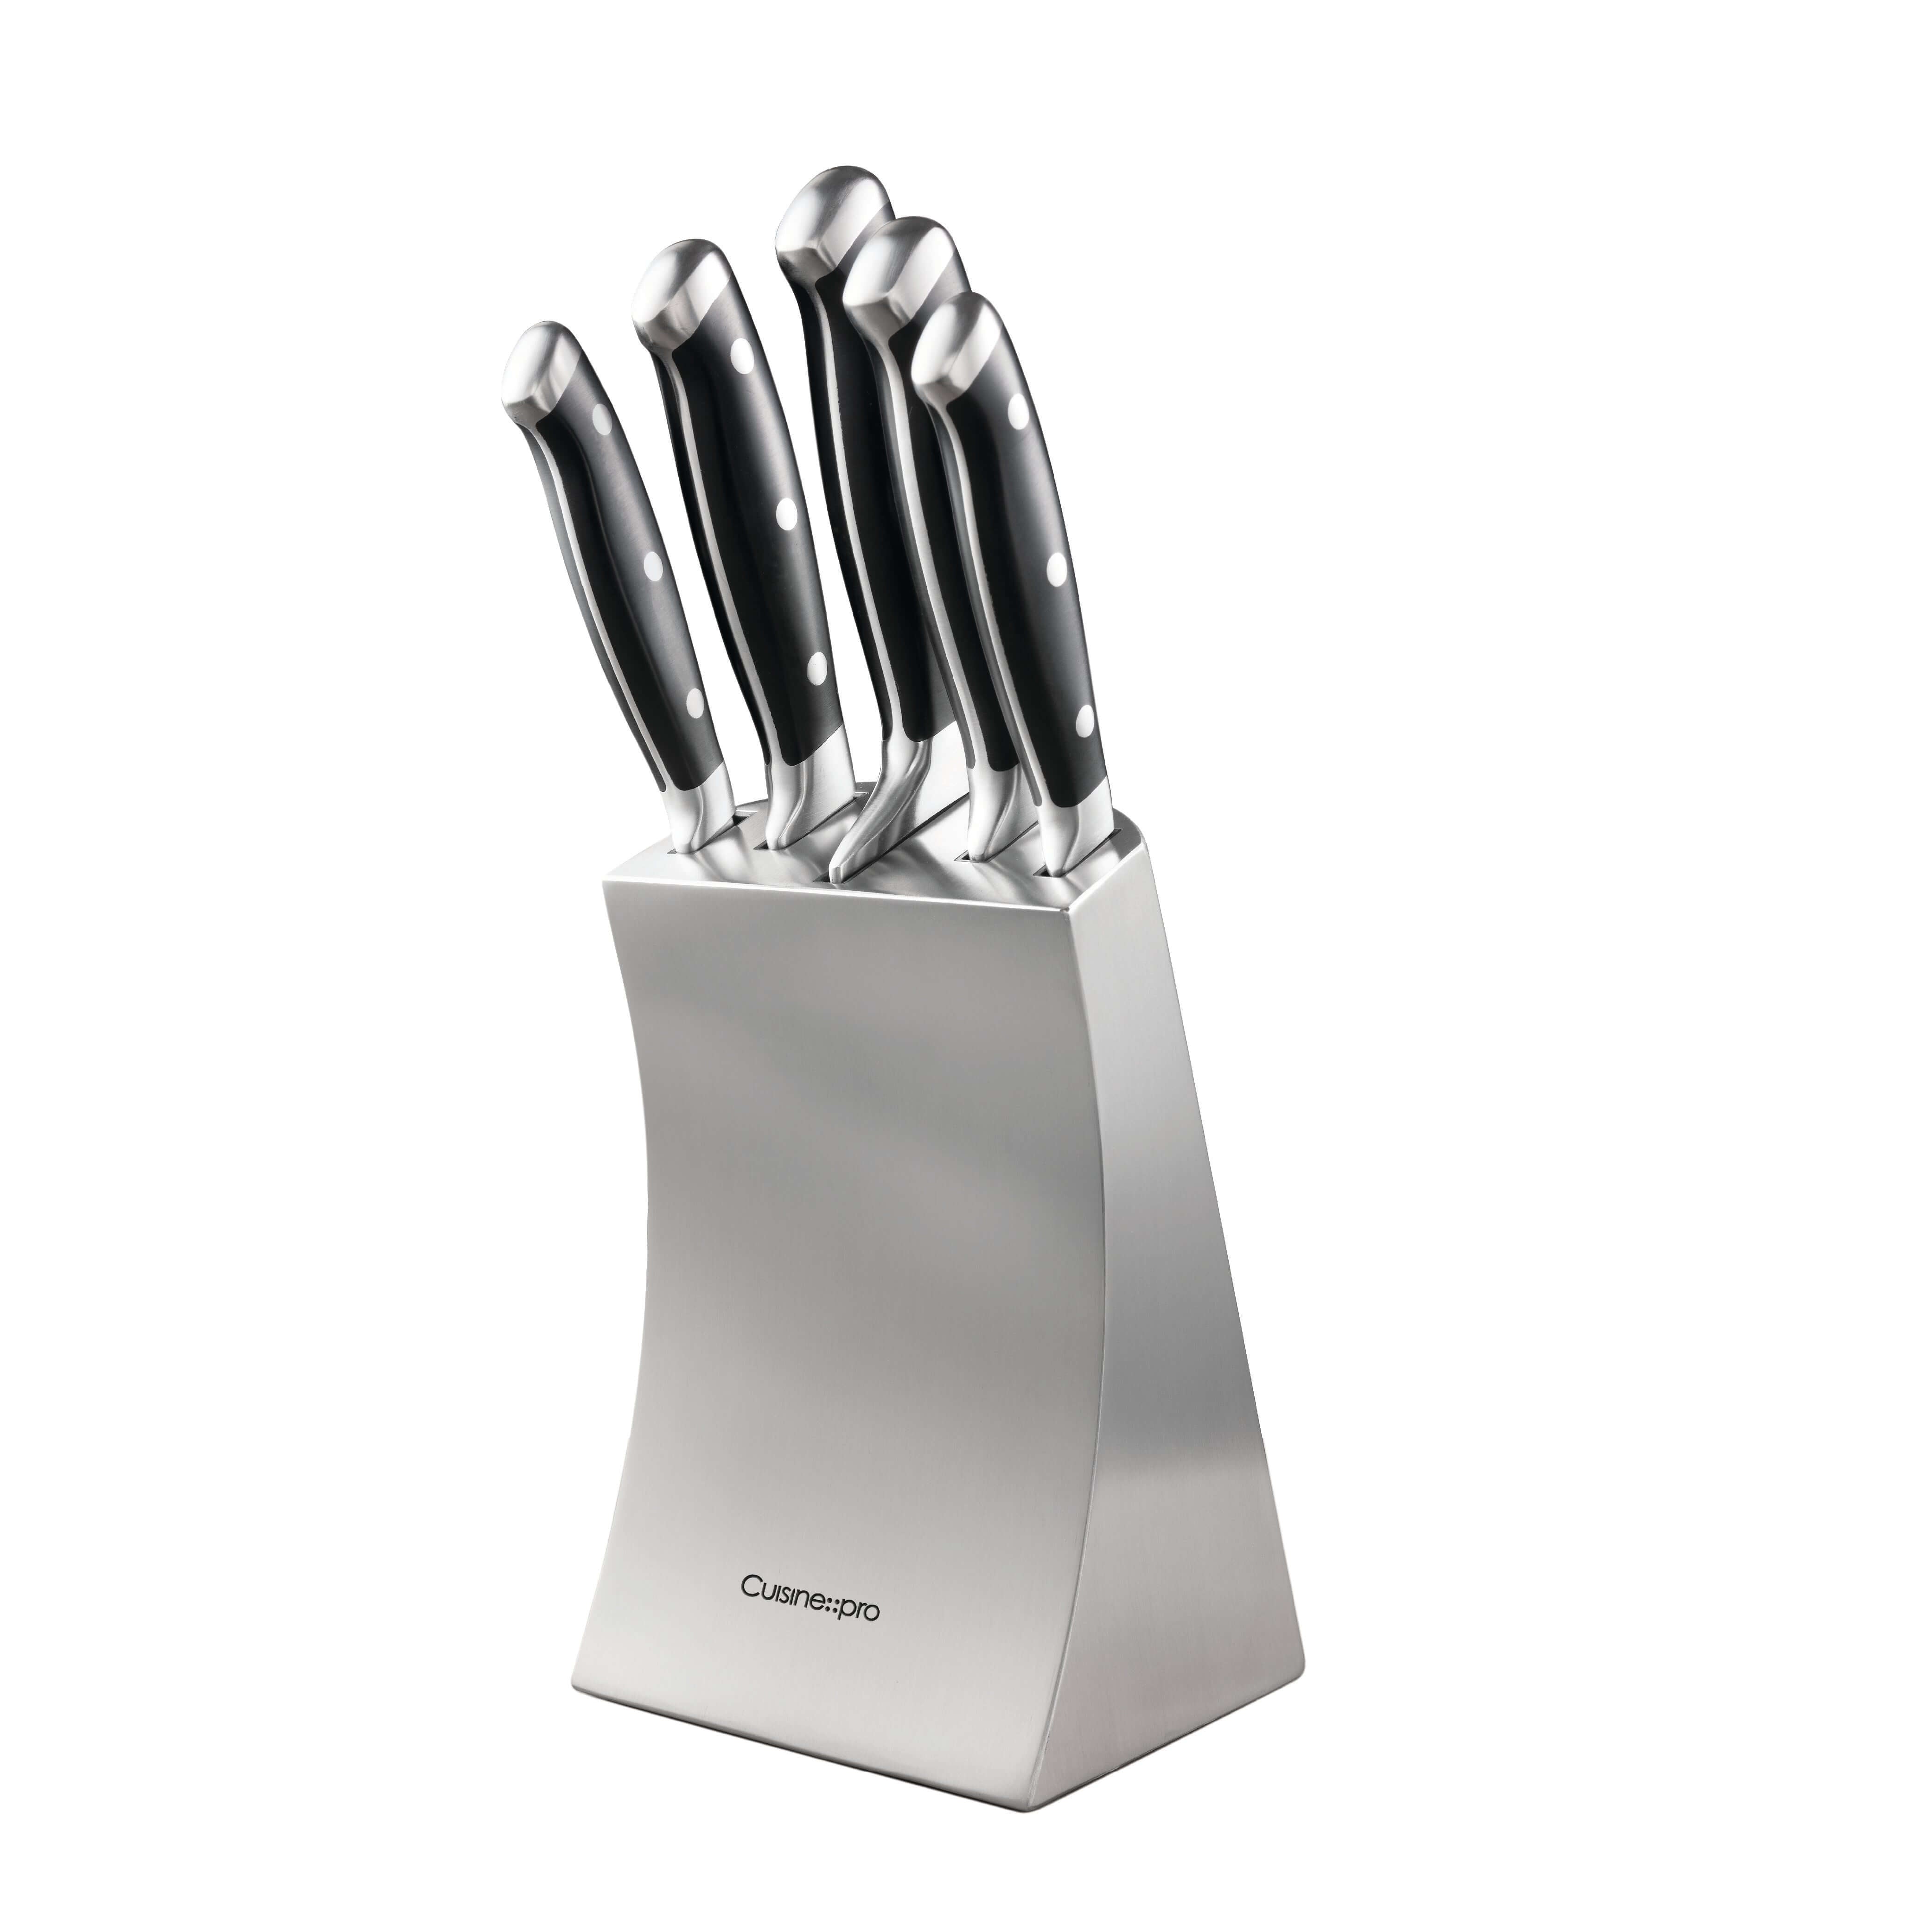 KD Kitchen Knife Block Set German Stainless Steel Knife with Built-In –  Knife Depot Co.